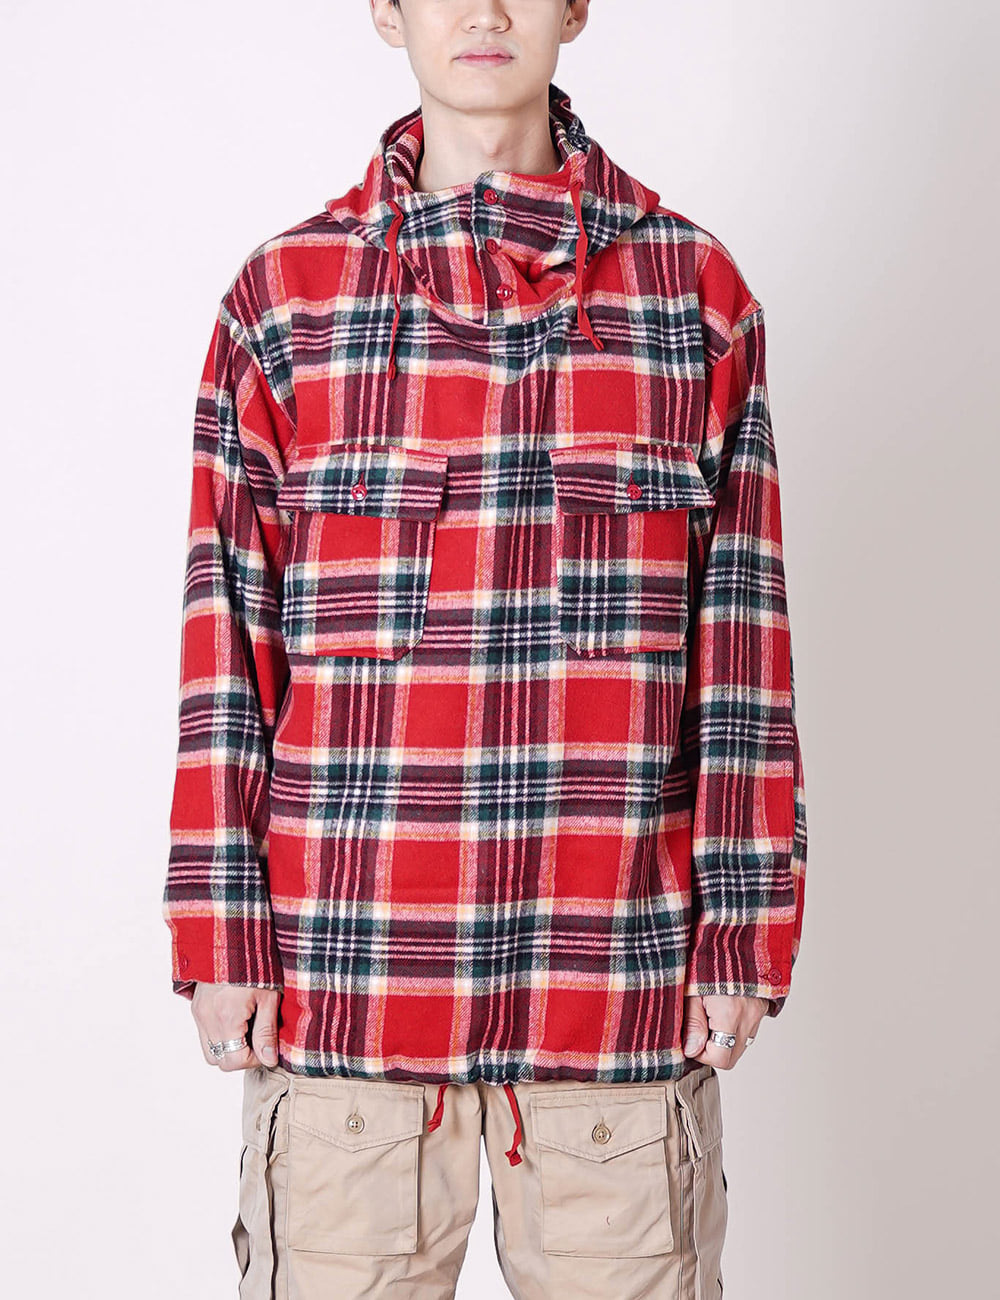 Cagoule Shirt (Red Green Poly Wool Plaid)